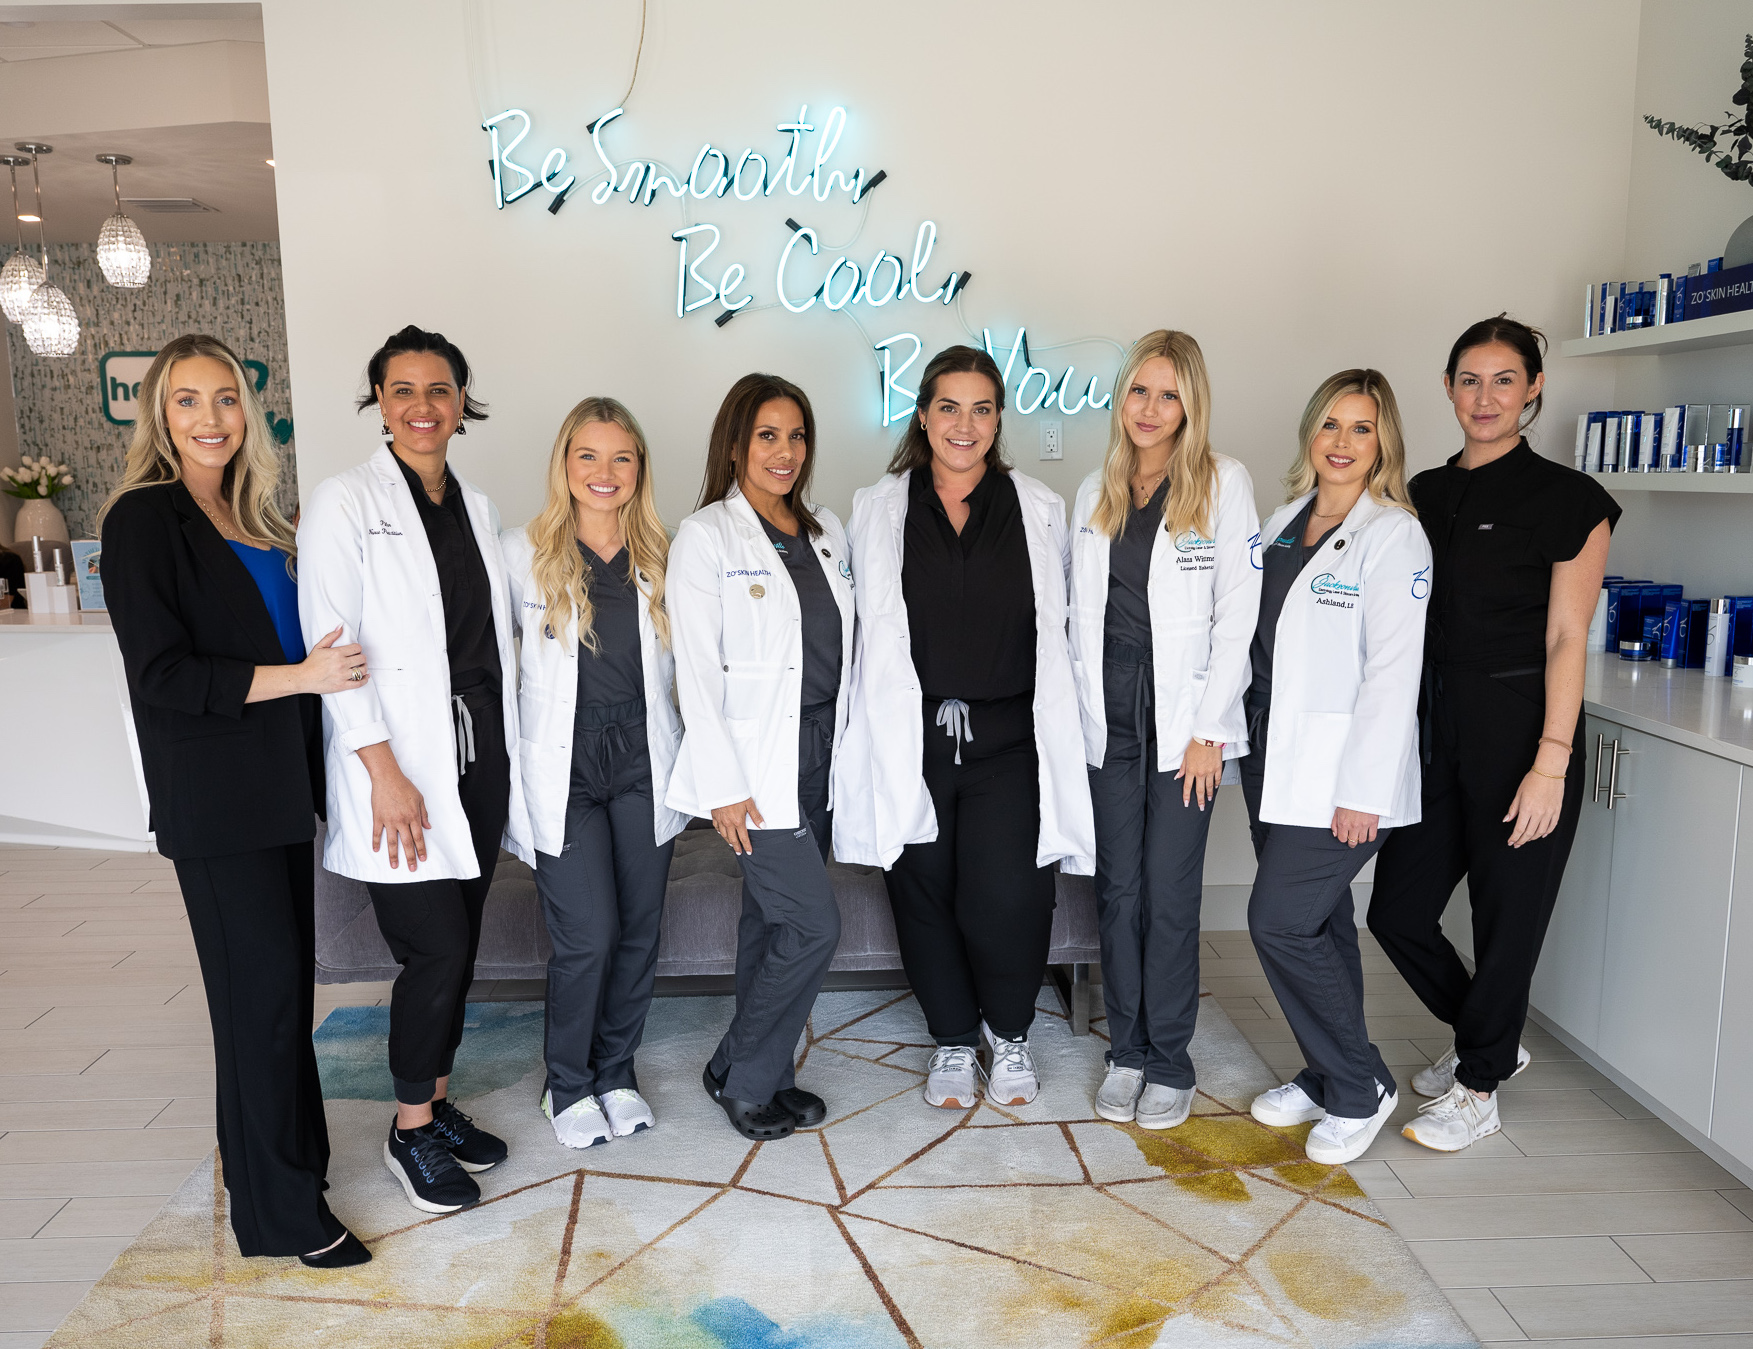 group photo of the educational team at Jax Electrology, Laser and Skin Academy